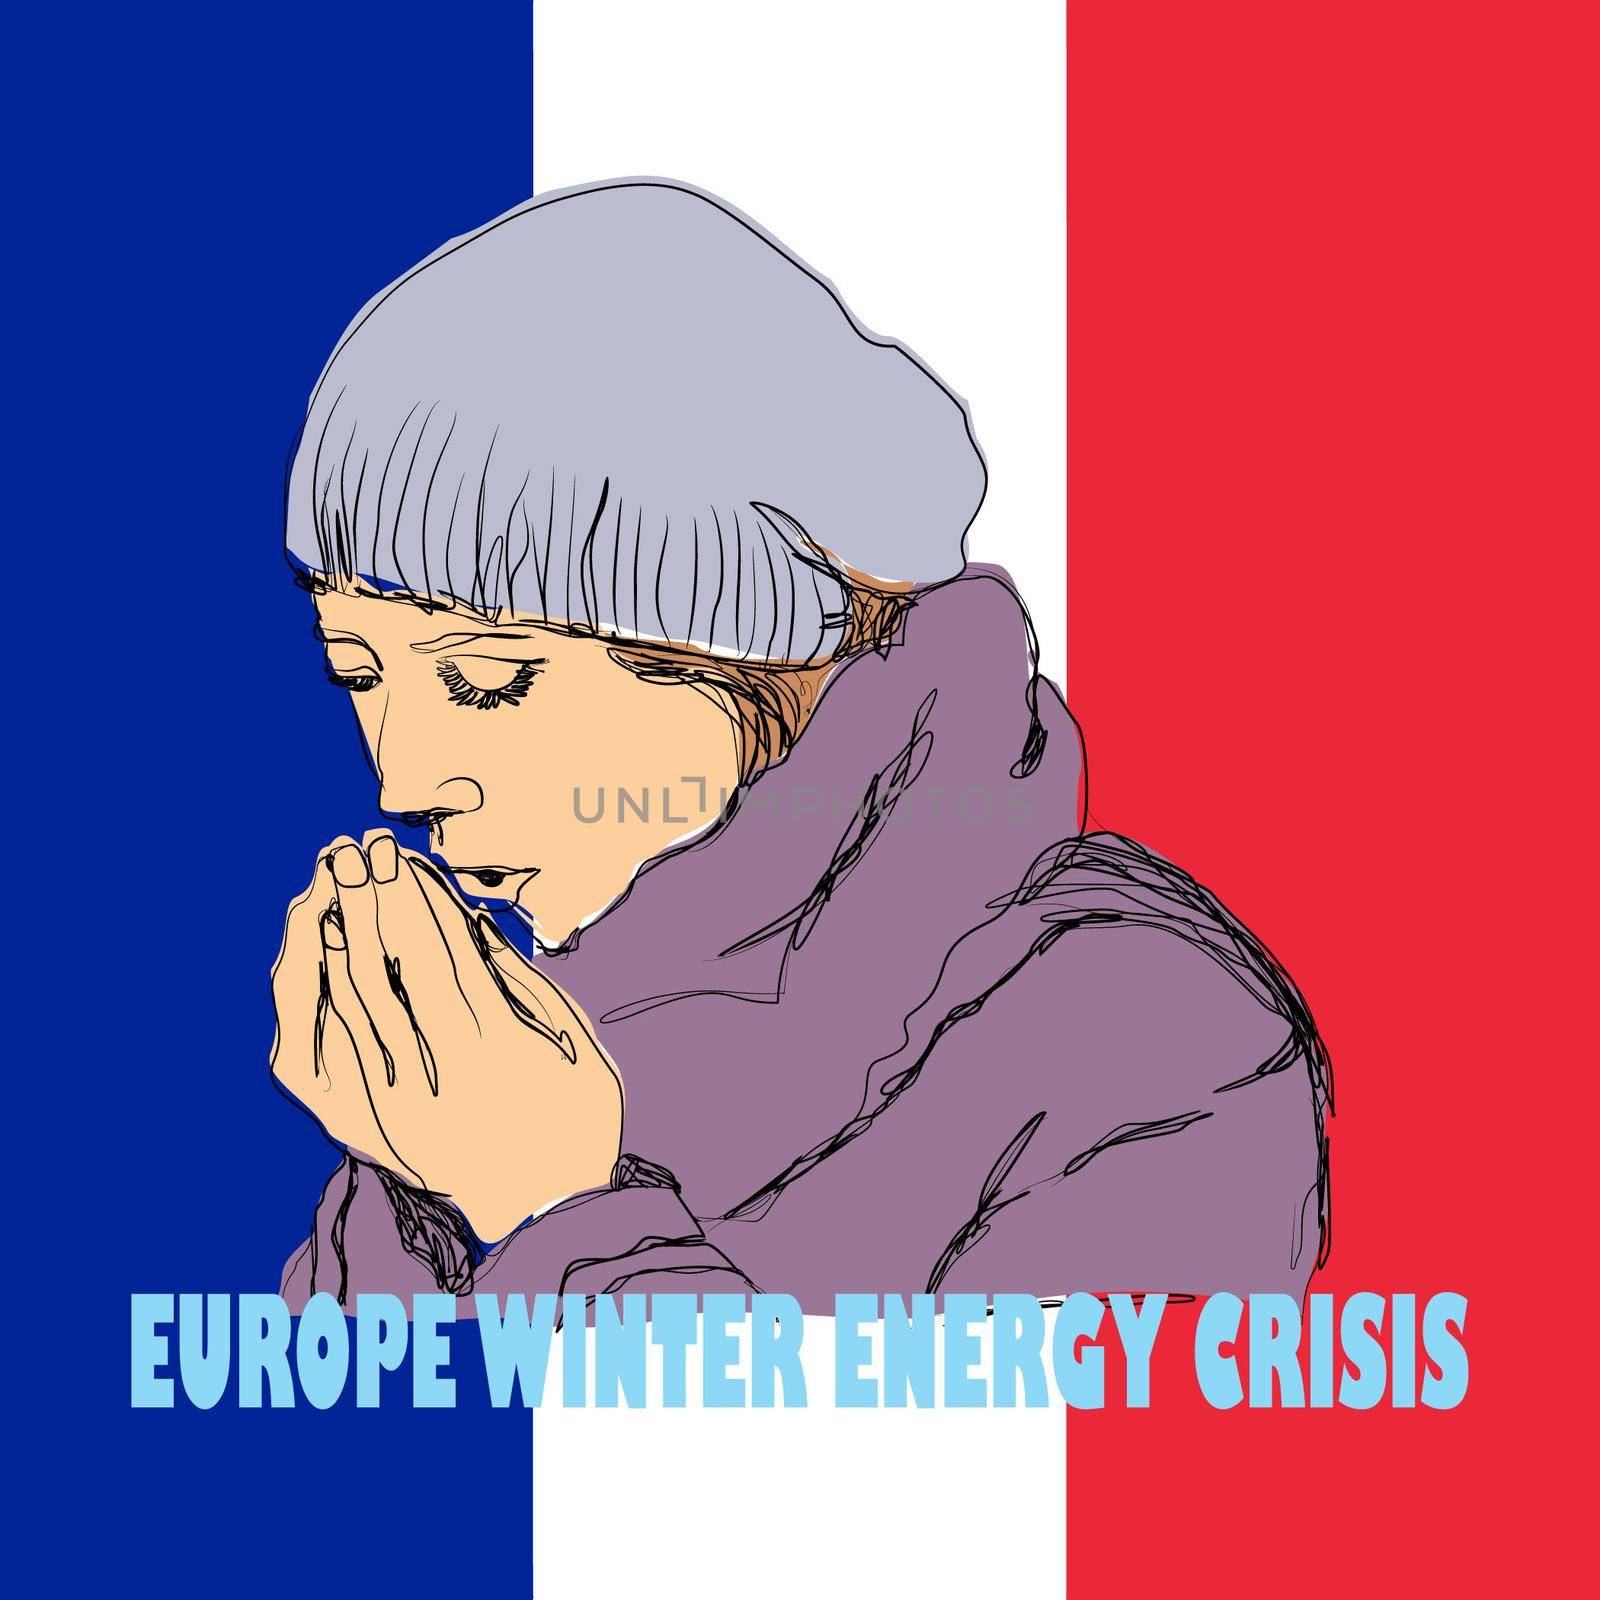 Hand drawn illustration of a cold person on the French flag background. useful for posters, pamphlets, wall decorations to invite people to be aware of energy that is increasingly expensive and scarce